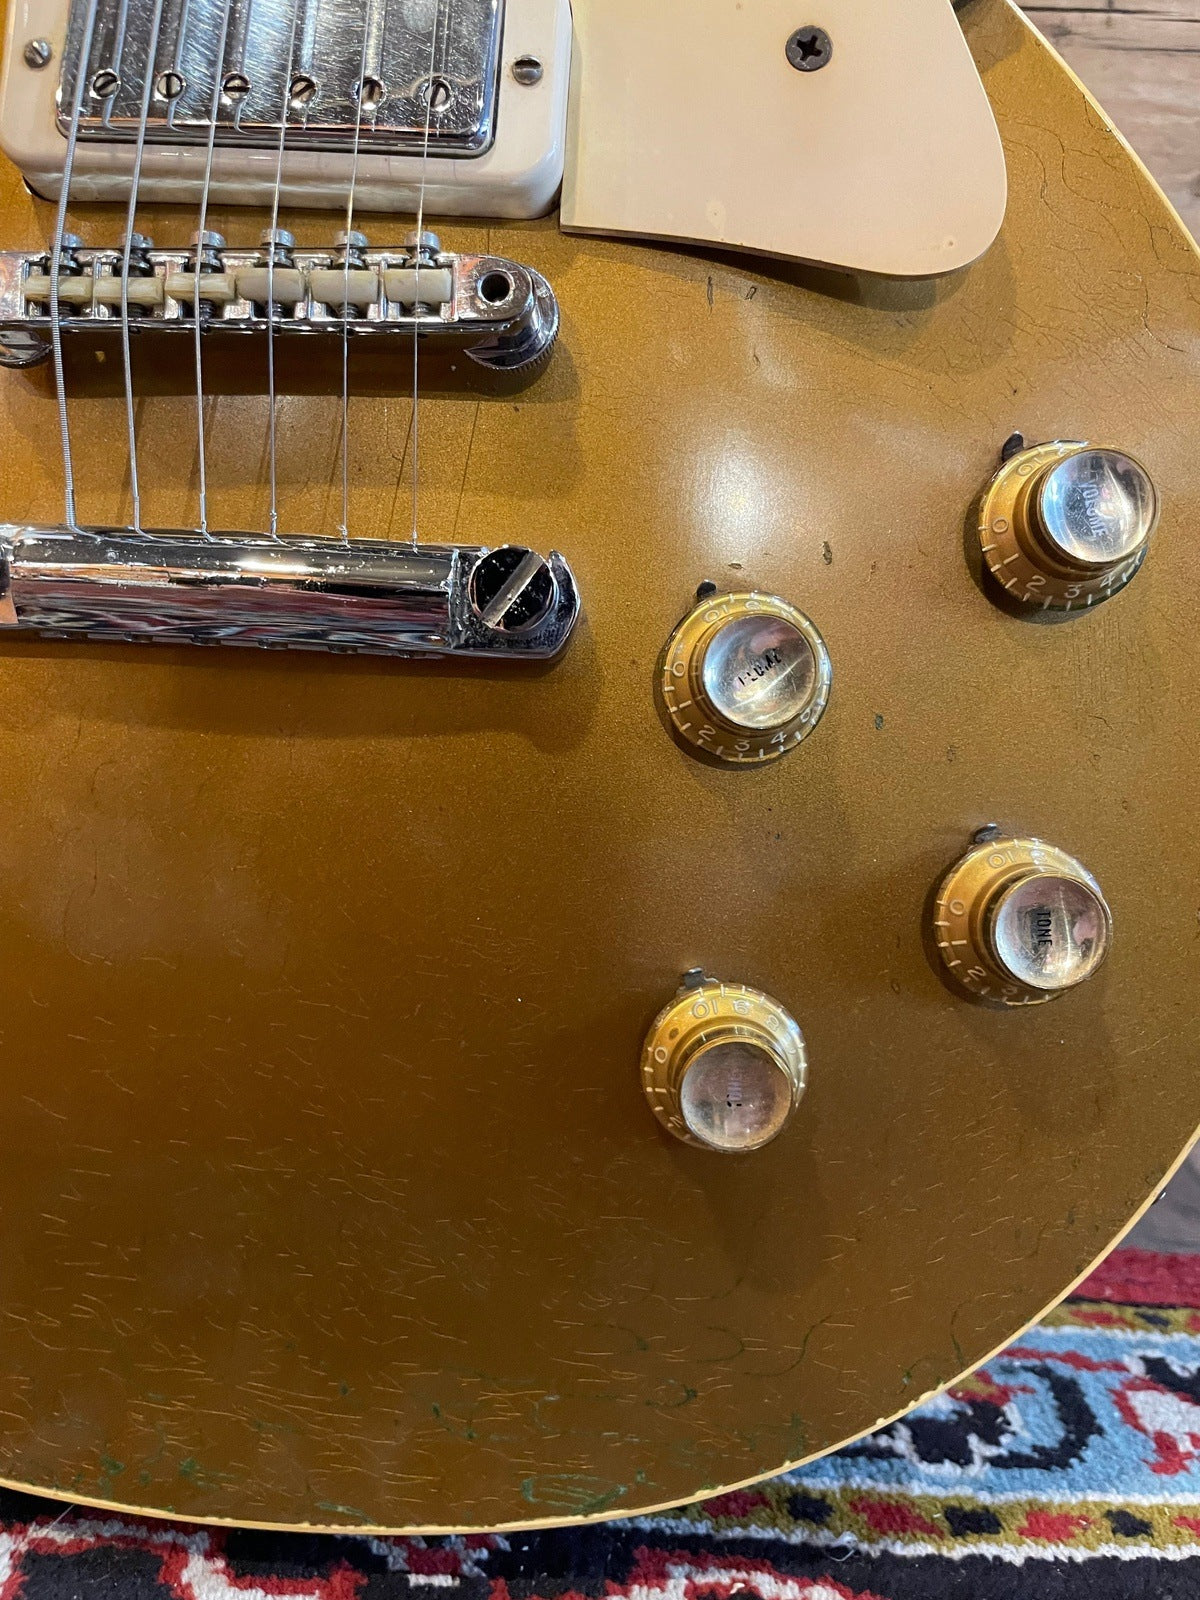 1970 Gibson Les Paul Deluxe, Gold Top